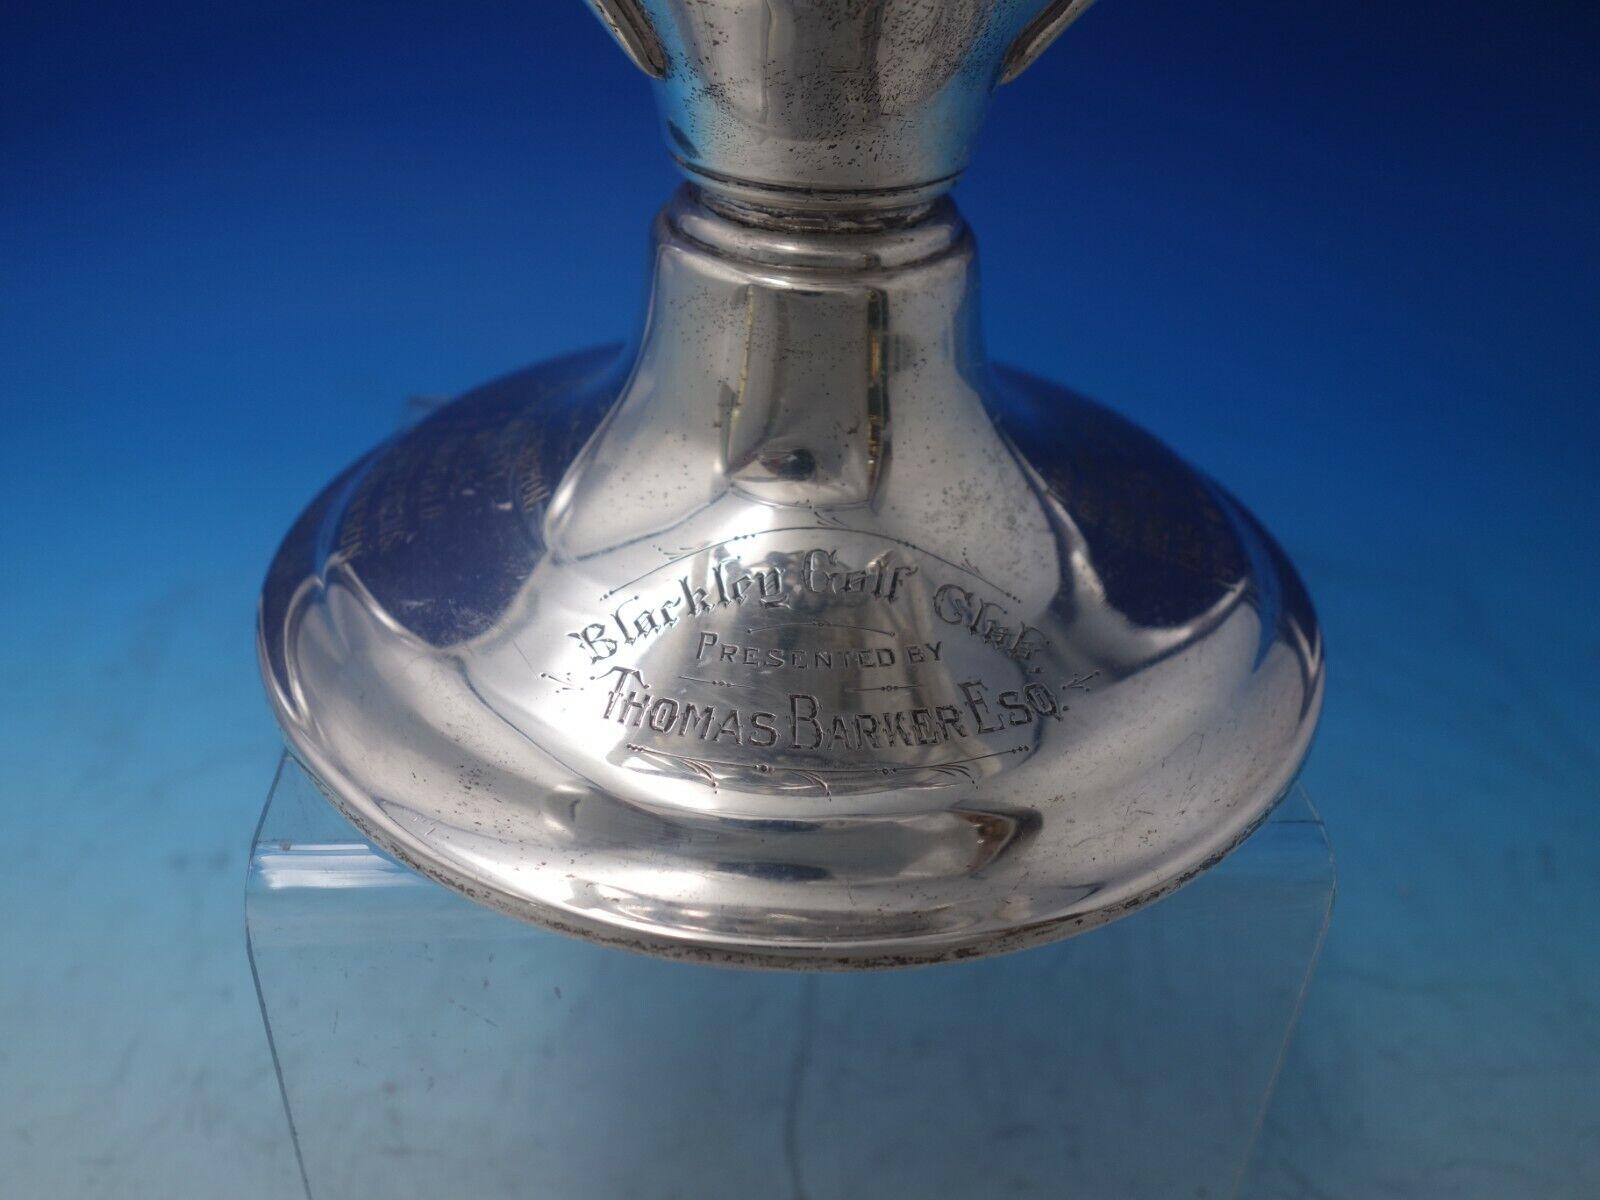 Frank Smith

Incredible Frank Smith sterling silver trophy / loving cup with 3 handles, for Barkley Golf Club starting in 1909 - 1937. Piece features a pair of 3D golf clubs and ball. The piece measures 14